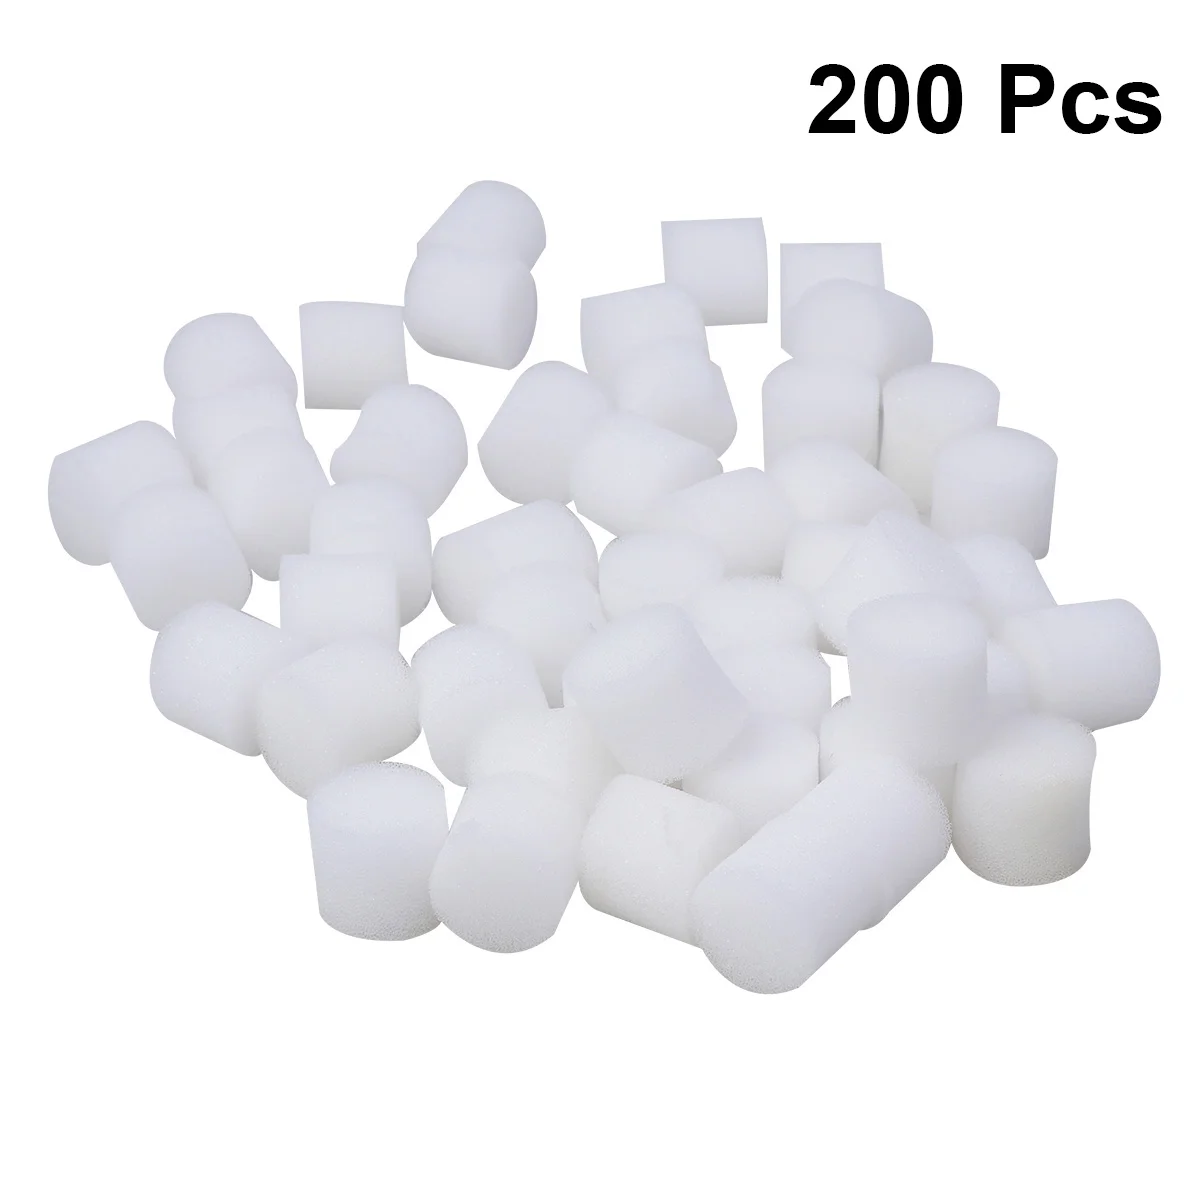 

200pcs Hydroponic Sponge Growing Media Cylindric Sponges Cube 30mm for Net Cup Pots Basket for Propagation Starting ( White )